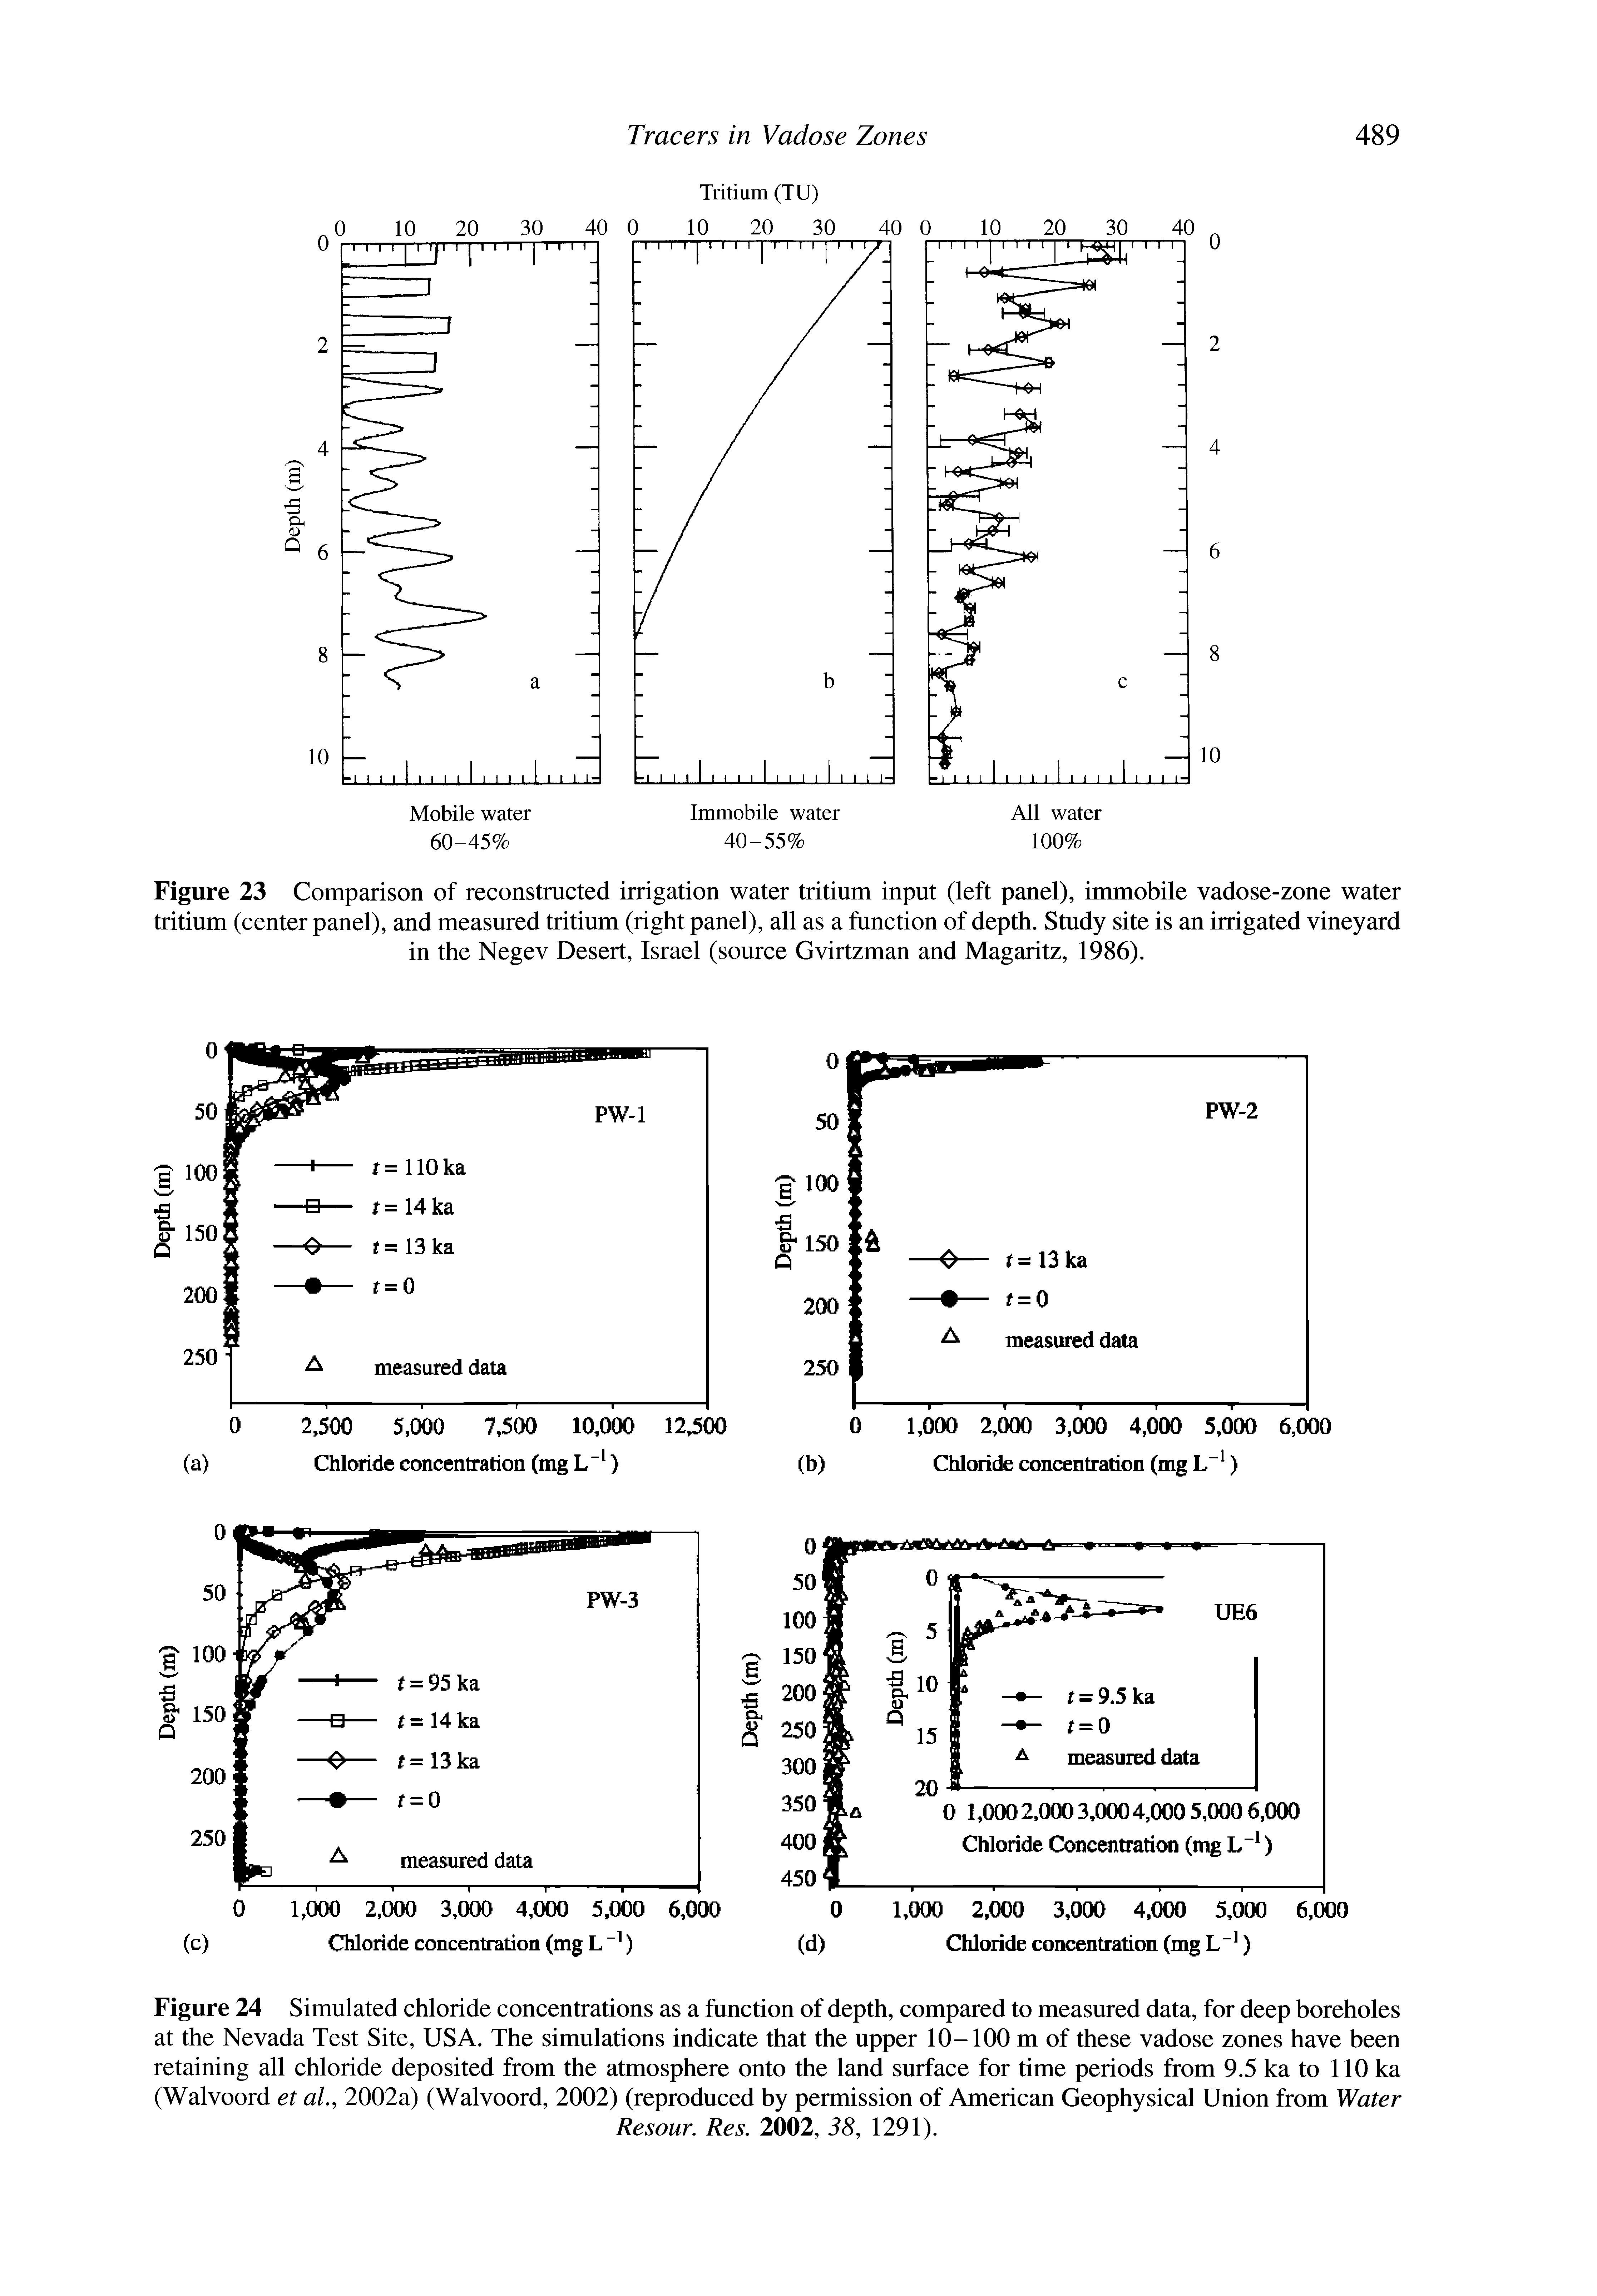 Figure 23 Comparison of reconstructed irrigation water tritium input (left panel), immobile vadose-zone water tritium (center panel), and measured tritium (right panel), all as a function of depth. Study site is an irrigated vineyard in the Negev Desert, Israel (source Gvirtzman and Magaritz, 1986).